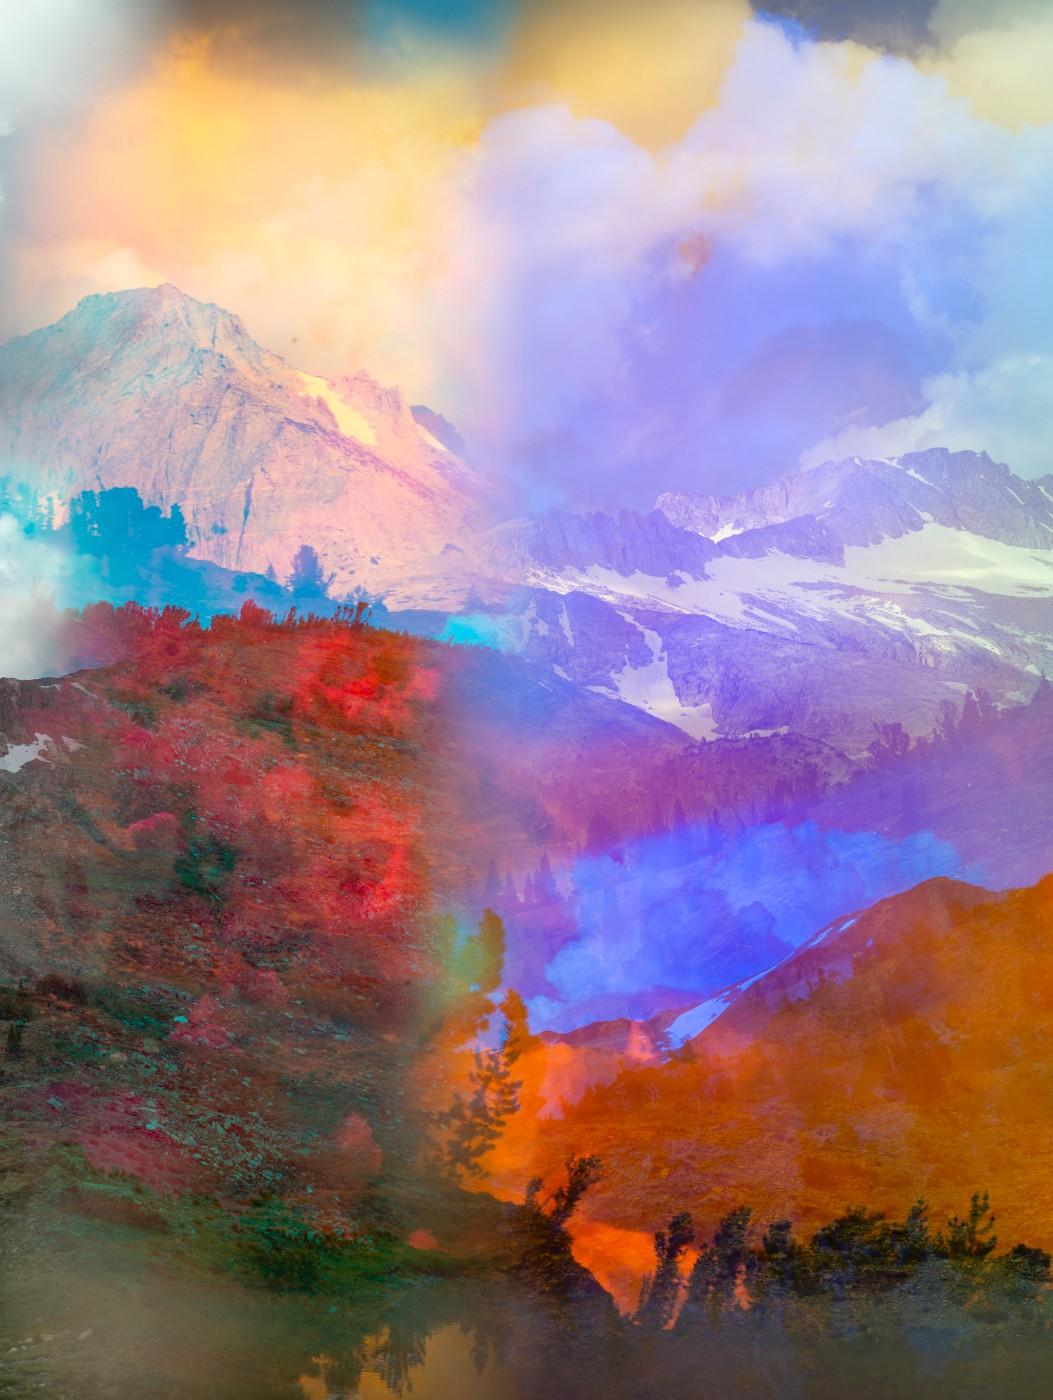 Terri Loewenthal, Psychscape 52 (North Peak, CA), 2018. Archival pigment print, 64 x 48 inches, Edition of 3 + 2AP.